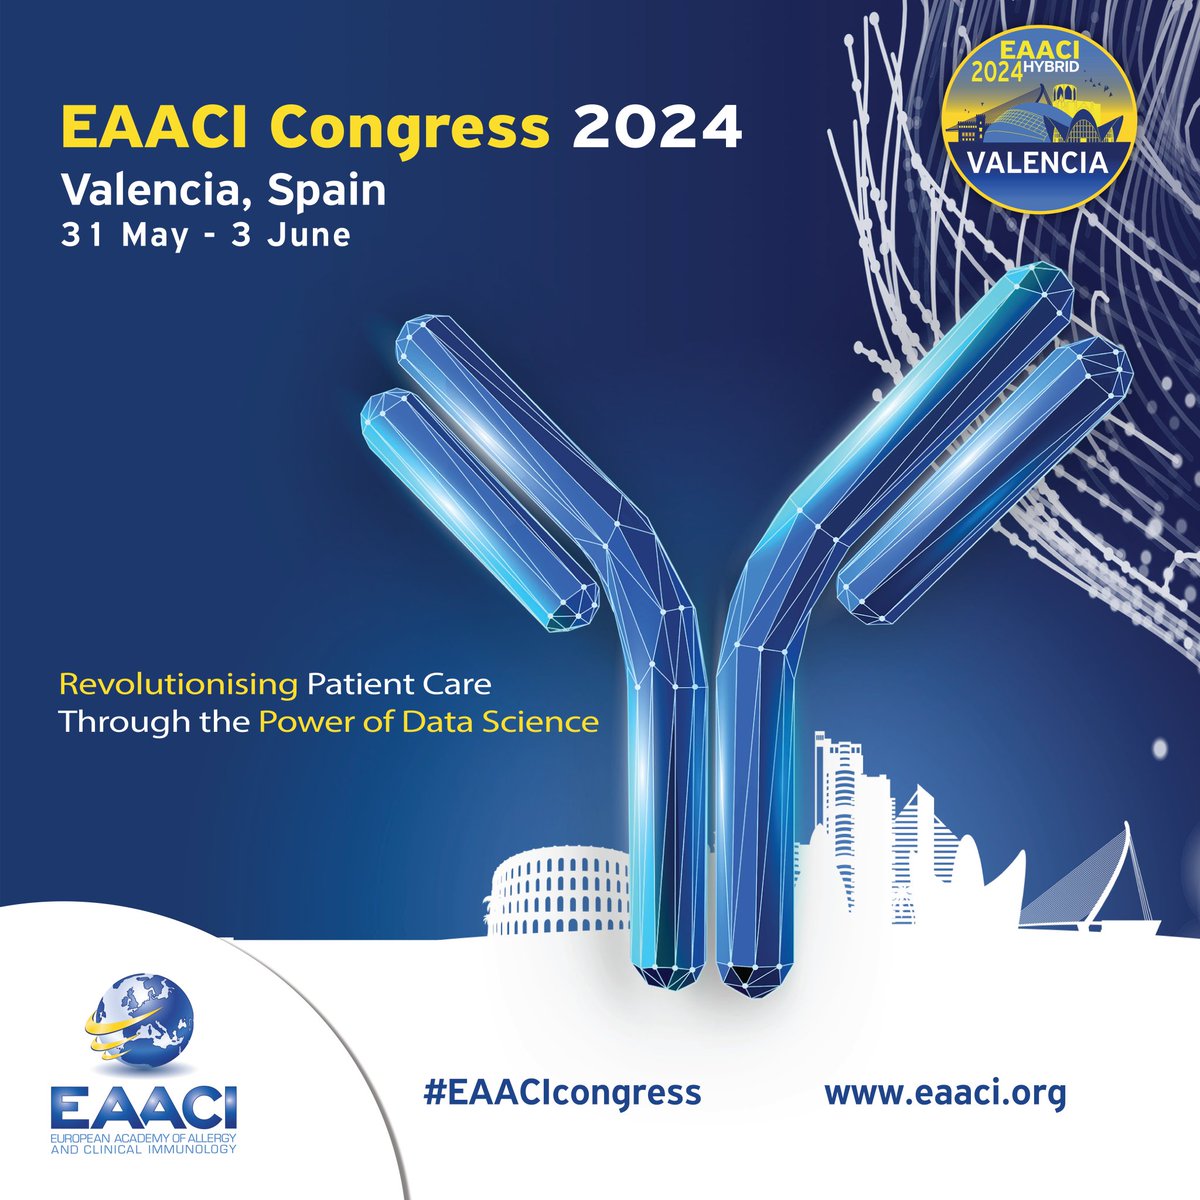 Act now, as the early bird registration for the #EAACICongress 2024 ends on 31 January. This is your last chance to save on registration costs for the largest #EAACI event, taking place from 31 May to 3 June in Valencia, Spain.

Register here: eaaci.org/events_congres…

@eaaci